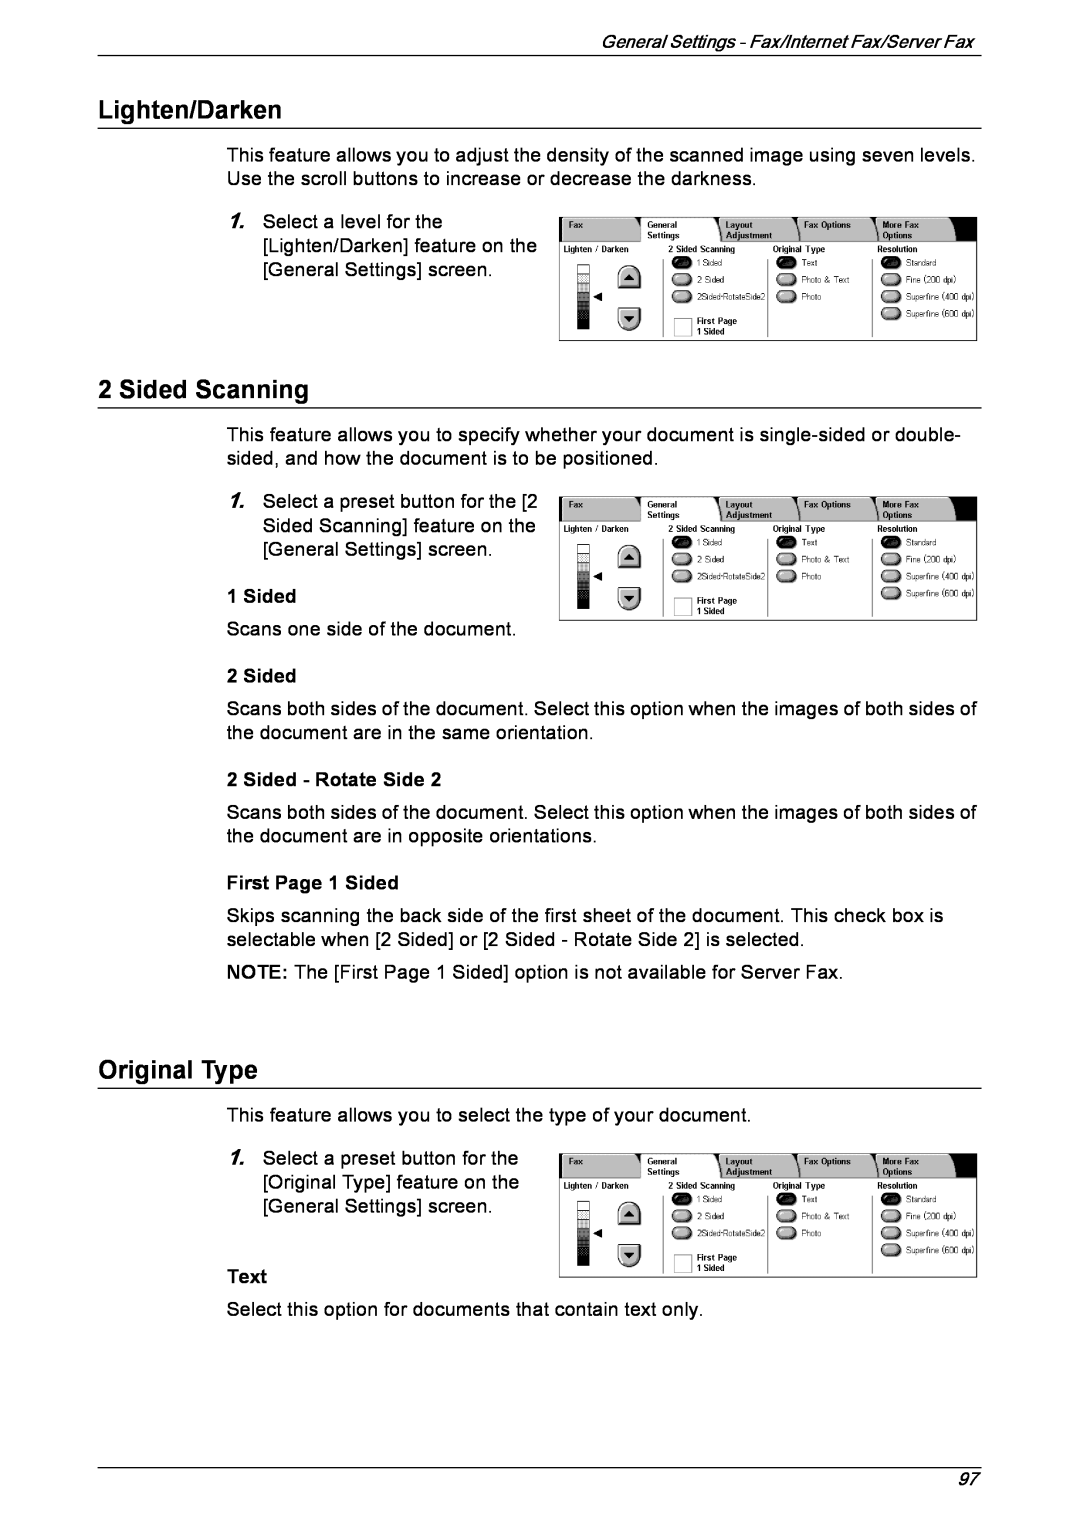 Xerox 5230 manual Lighten/Darken, Sided Scanning, Sided - Rotate Side, First Page 1 Sided, Original Type, Text 